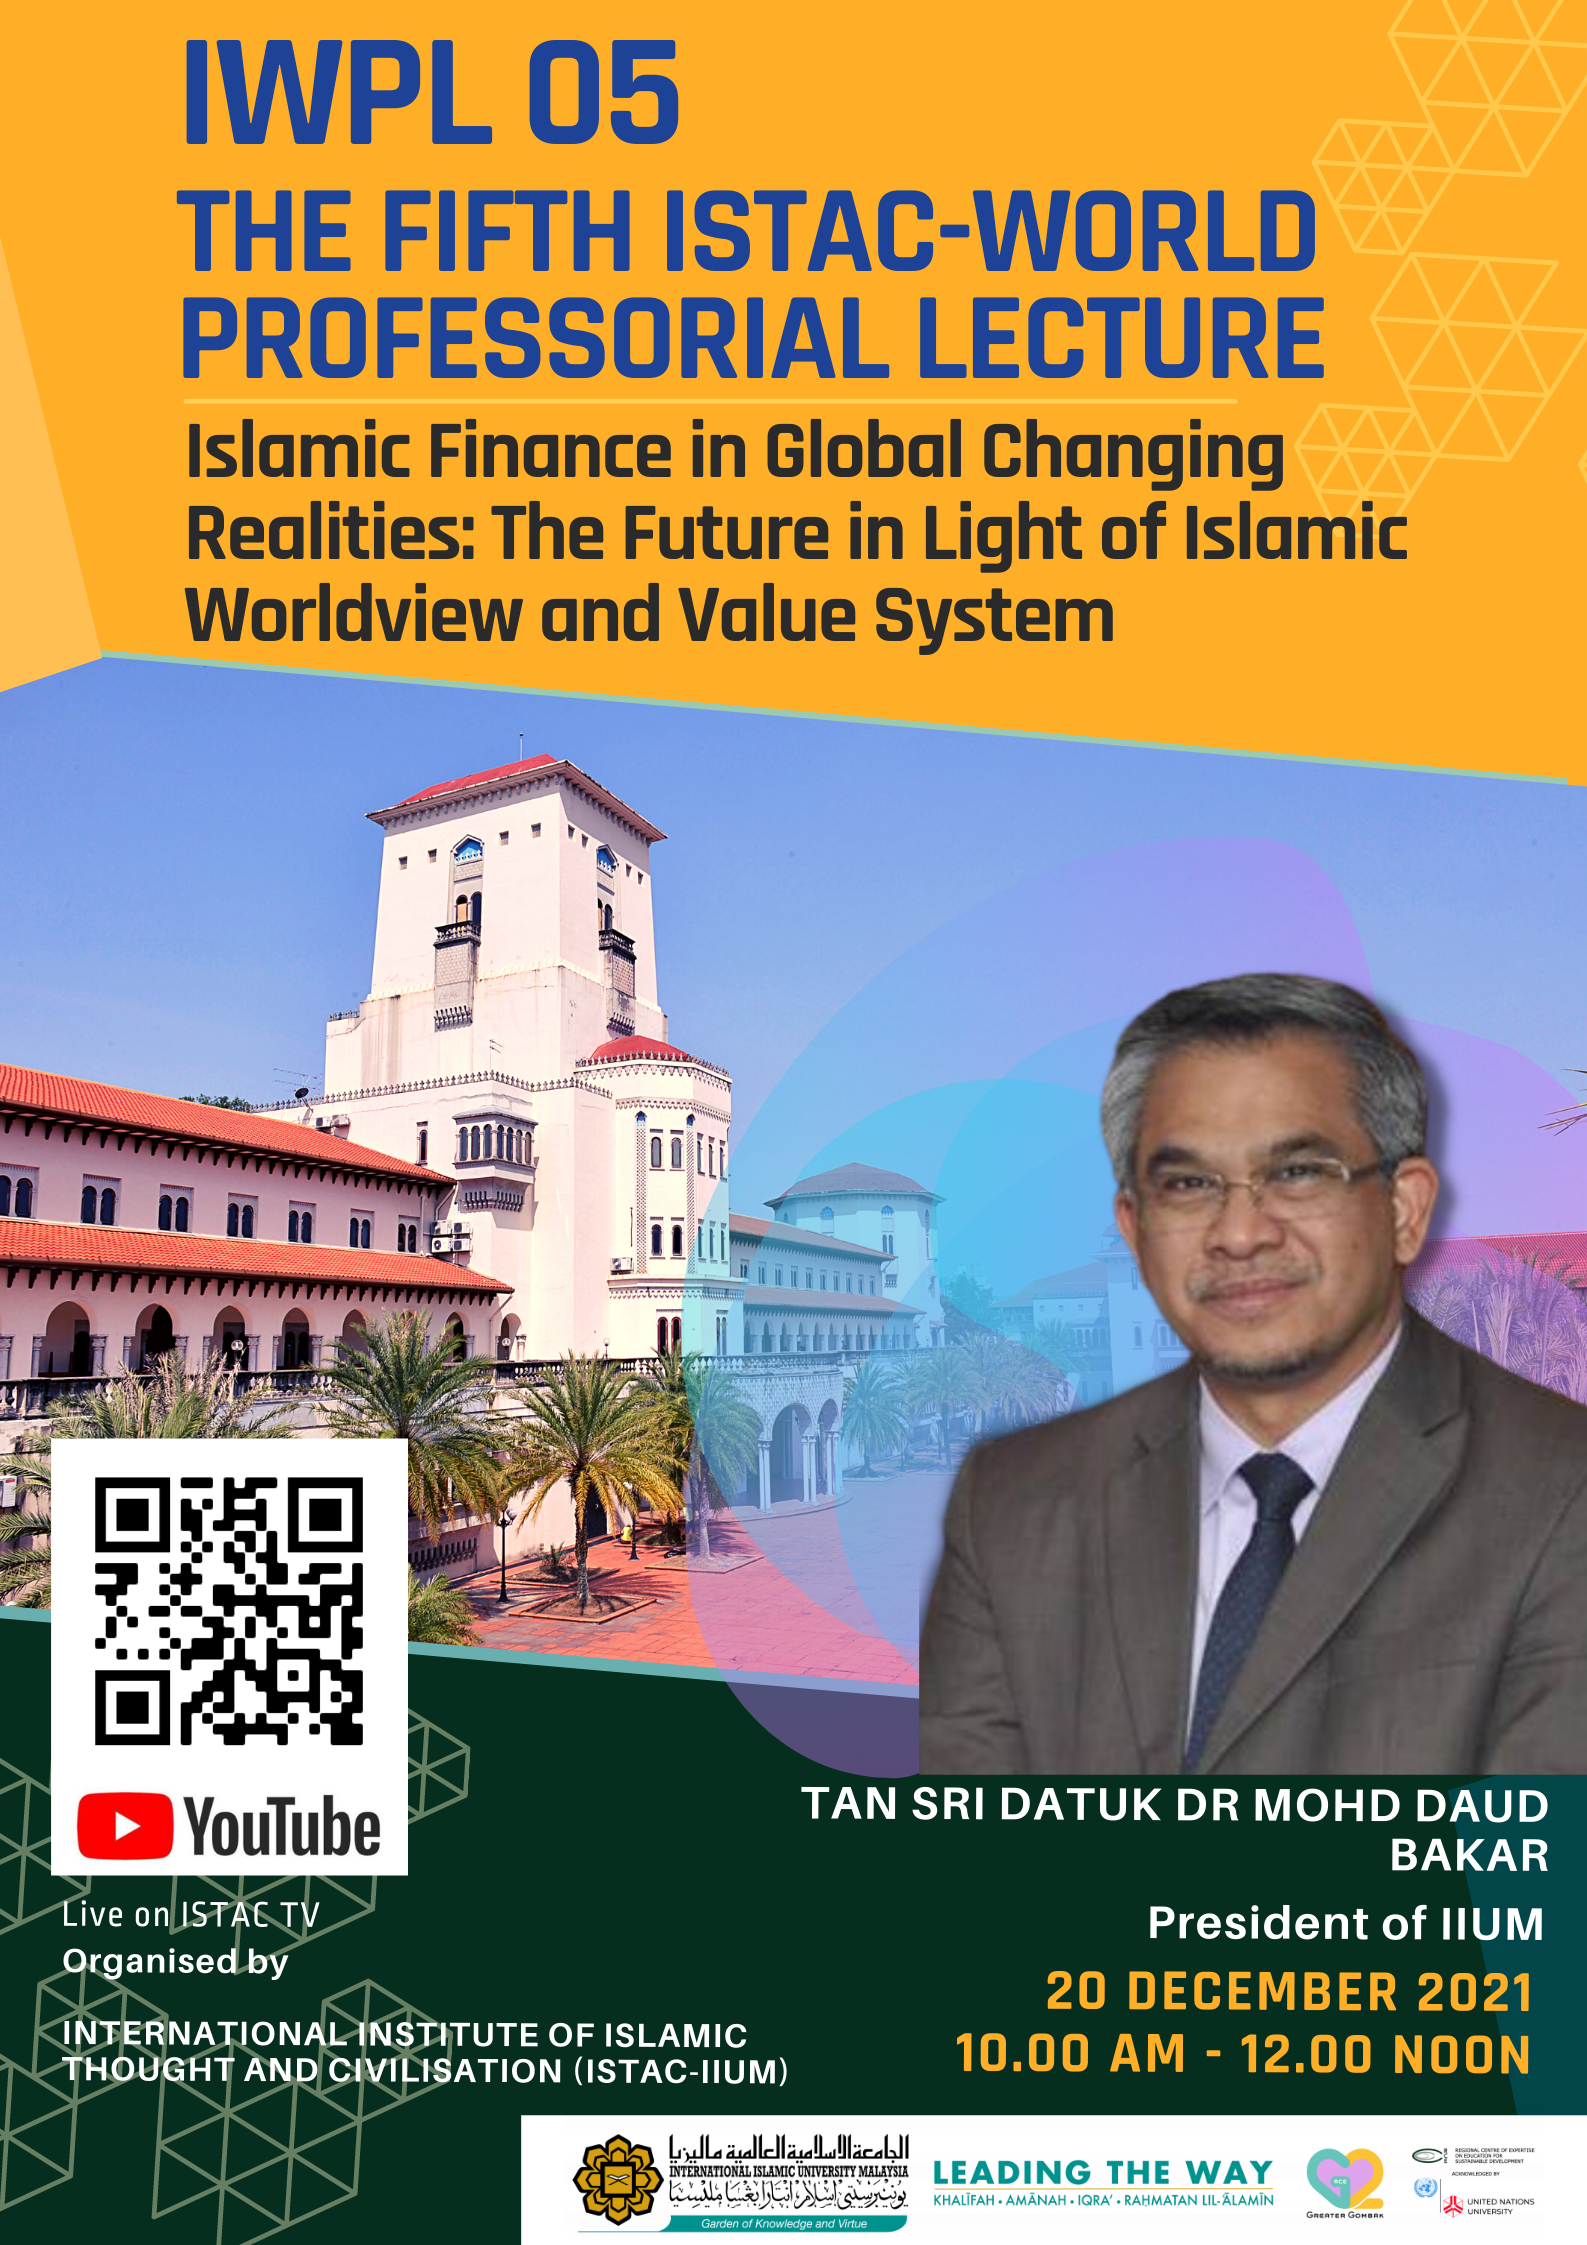 IWPL 05 - THE FIFTH ISTAC-WORLD PROFESSORIAL LECTURE